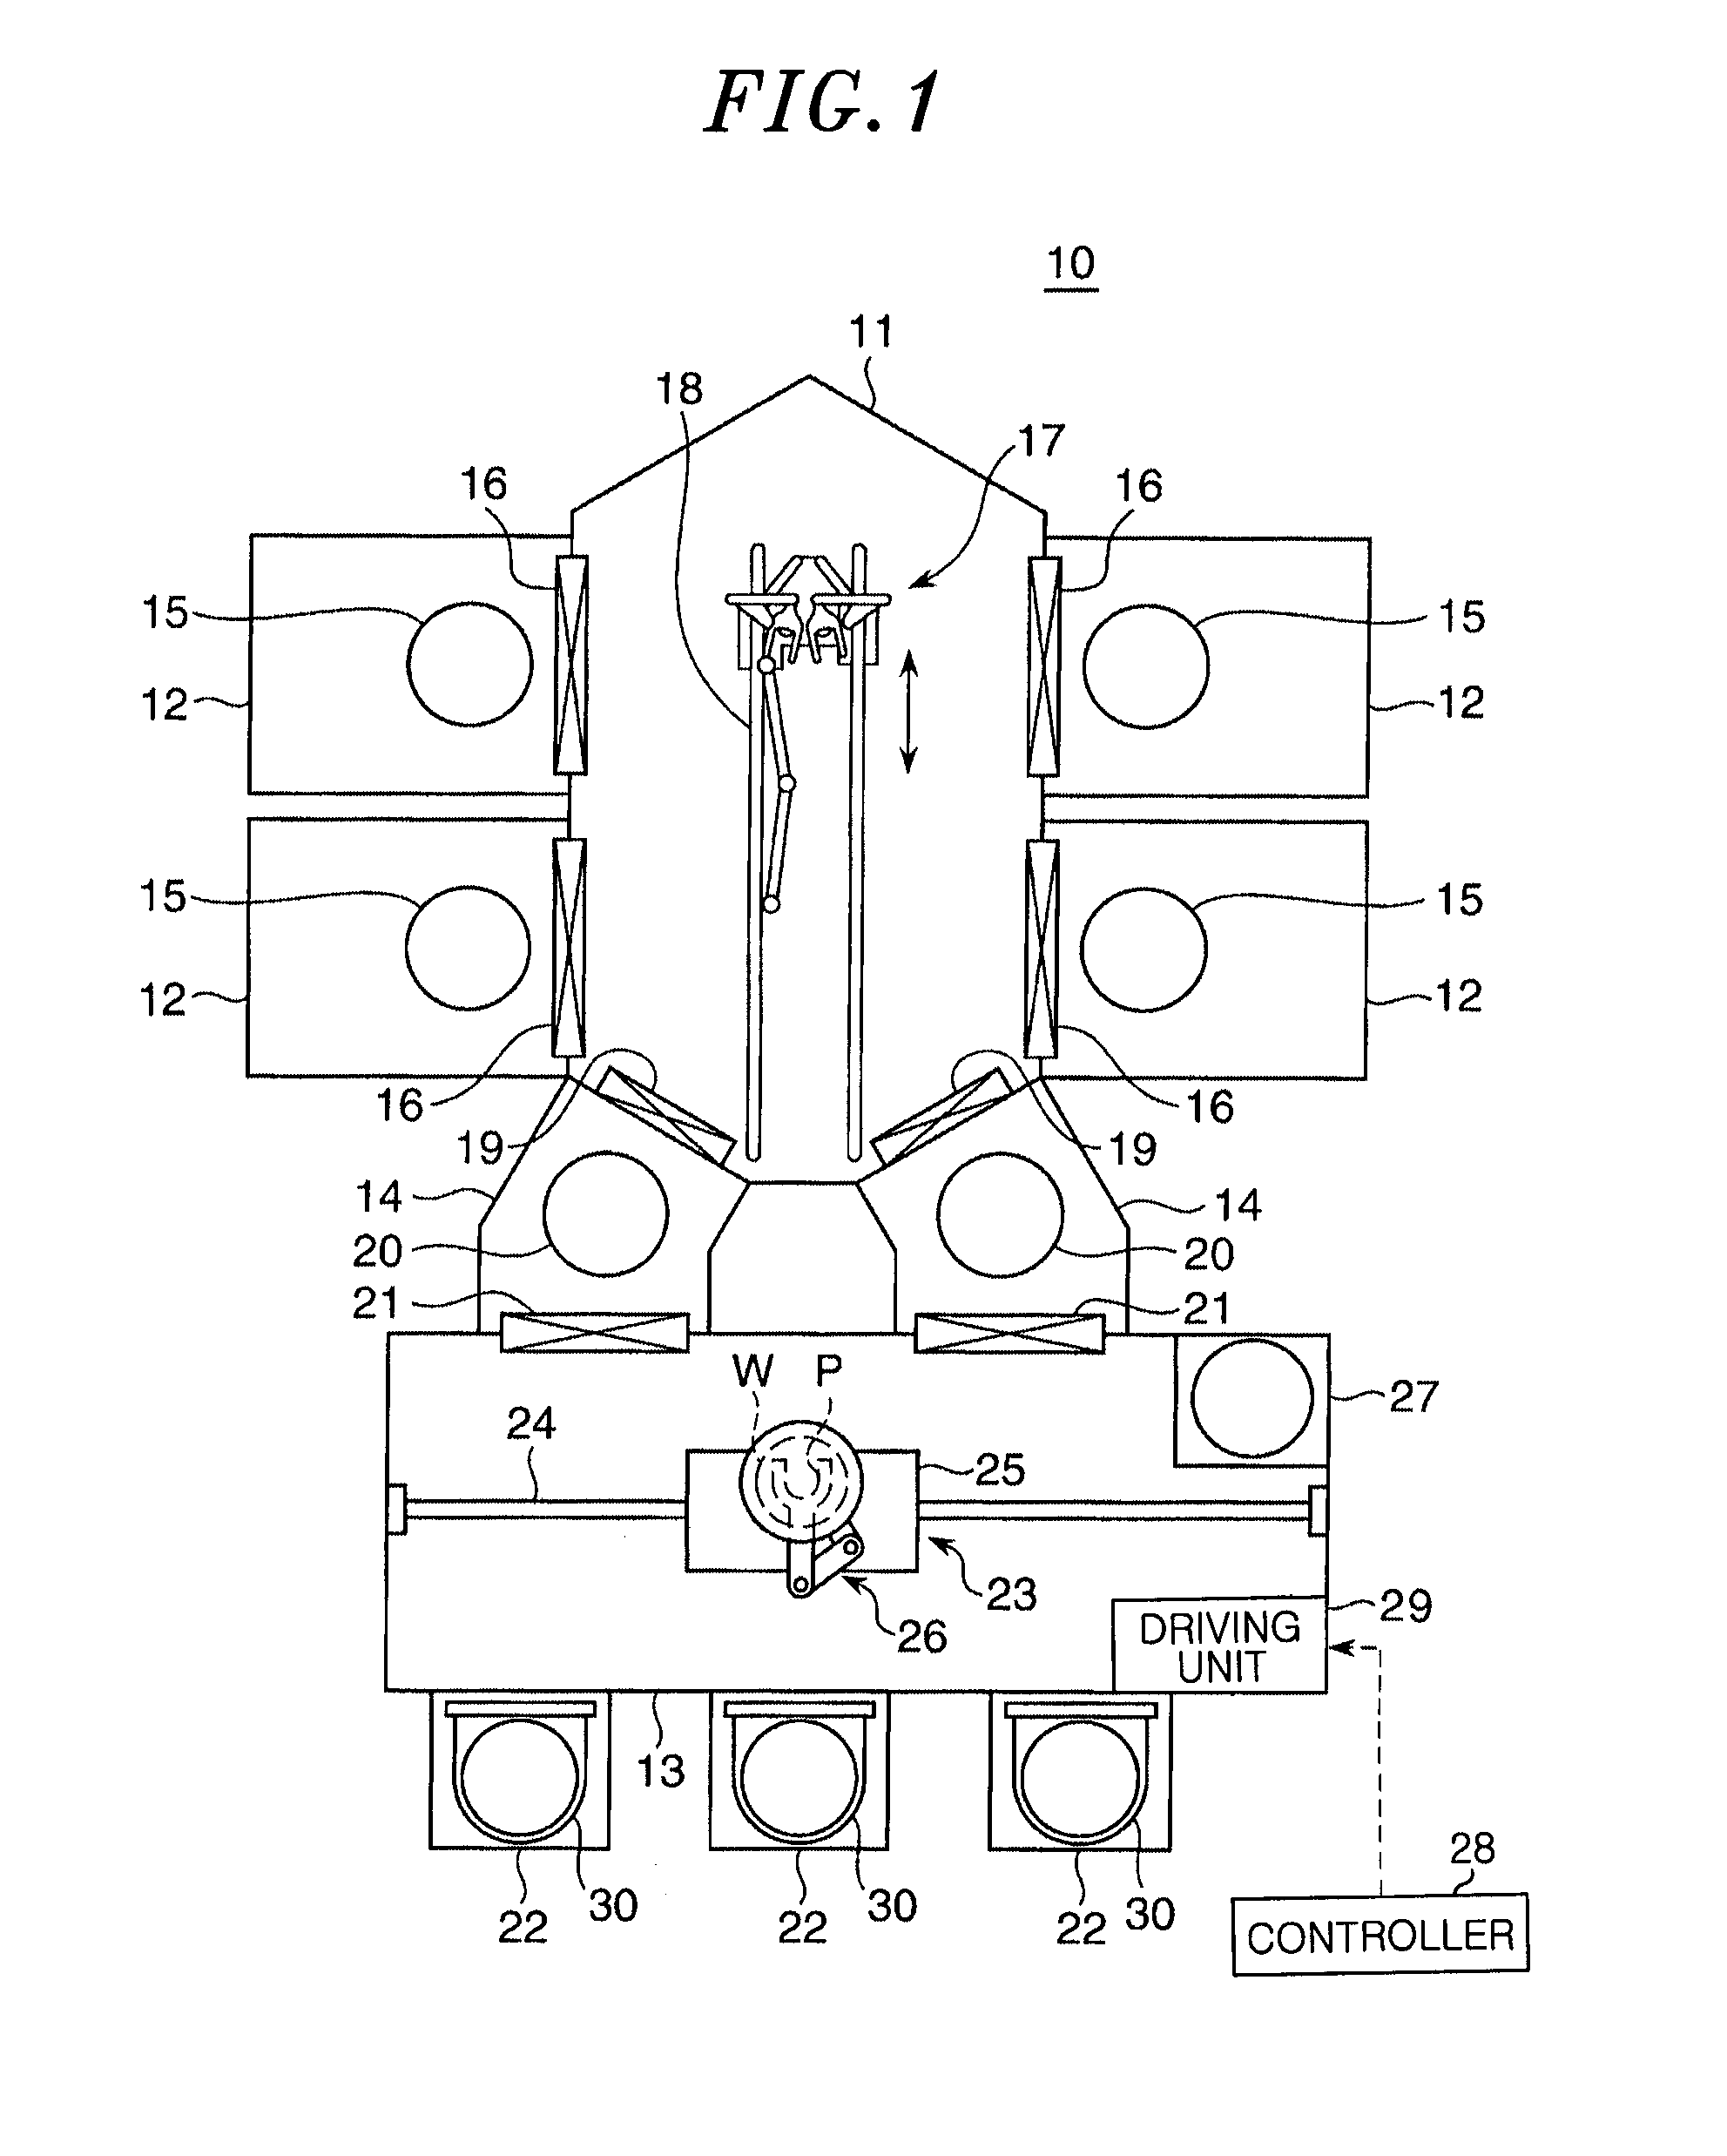 Substrate processing apparatus, cover opening and closing mechanism,shielding mechanism, and method for purging container